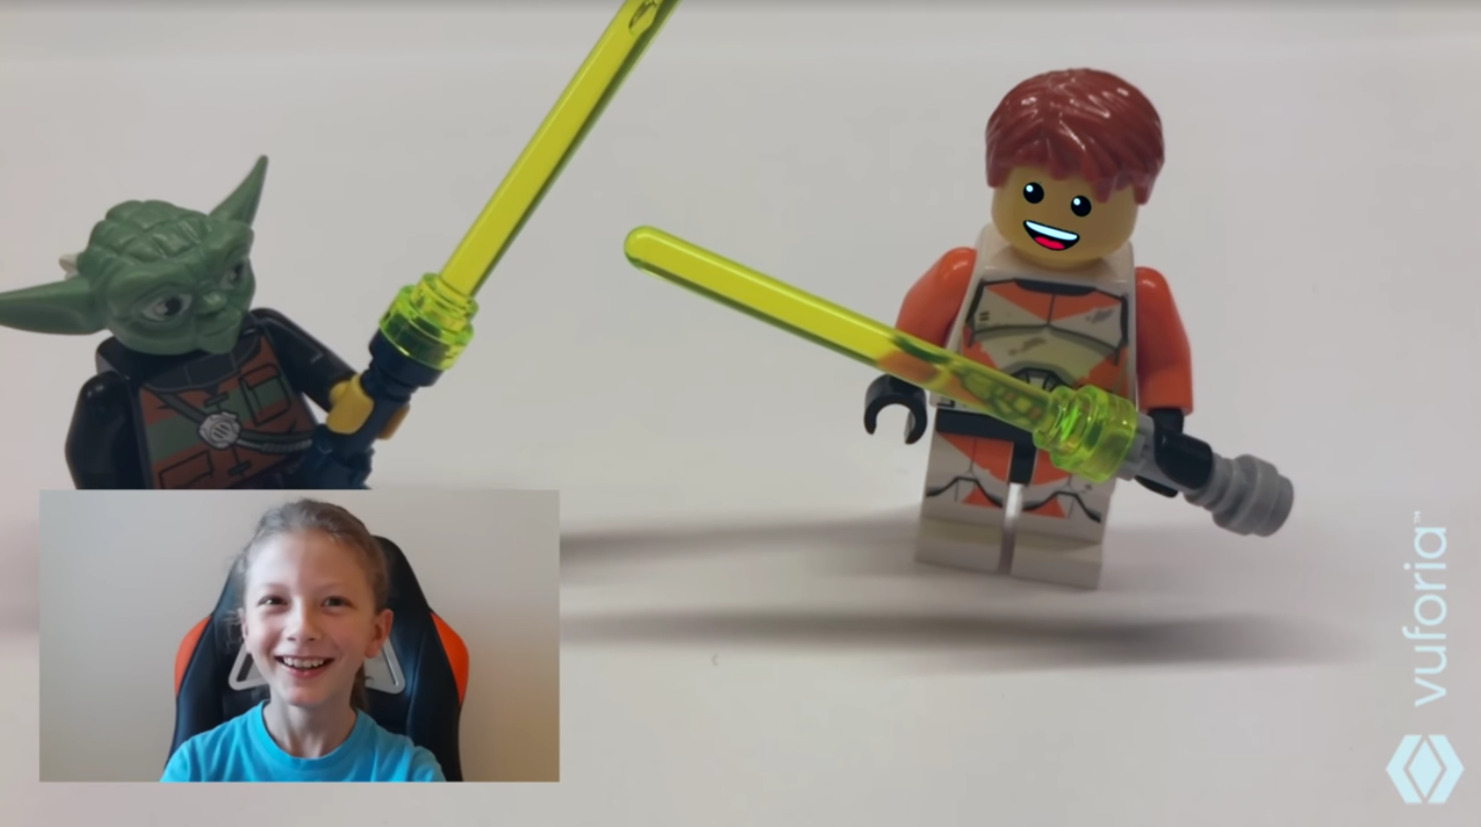 SDK on the Spot: Bringing LEGO toys to Life with Emotion in AR